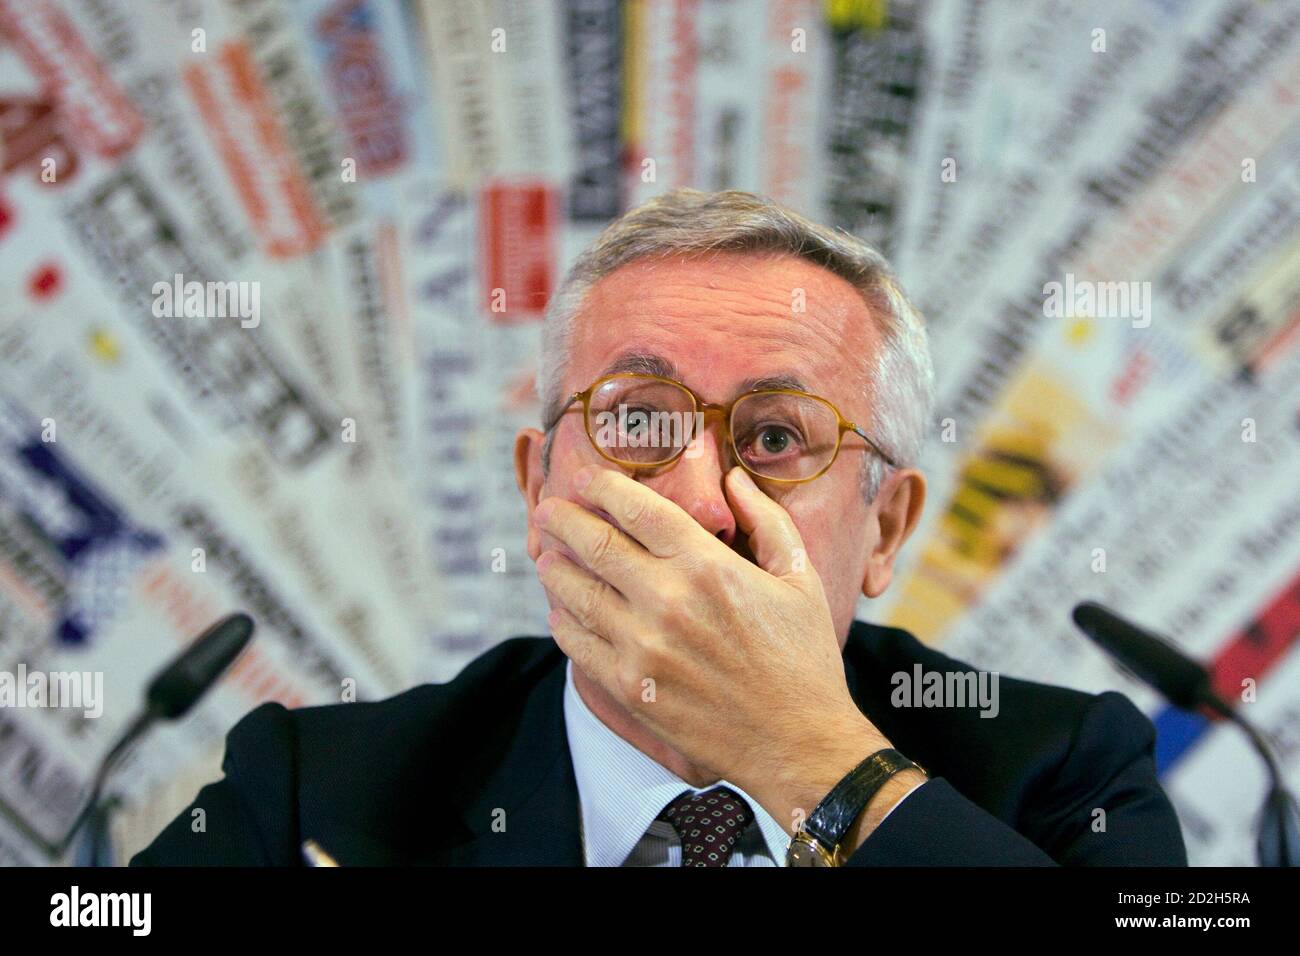 Italy's Economy Minister Giulio Tremonti reacts during a news conference at the Foreign Press Association in Rome October 16, 2008. Tremonti said on Thursday that the global financial and banking crisis had been overcome but persisting pessimism on markets reflected fear about the 'real' economy. REUTERS/Alessandro Bianchi        (ITALY) Stock Photo